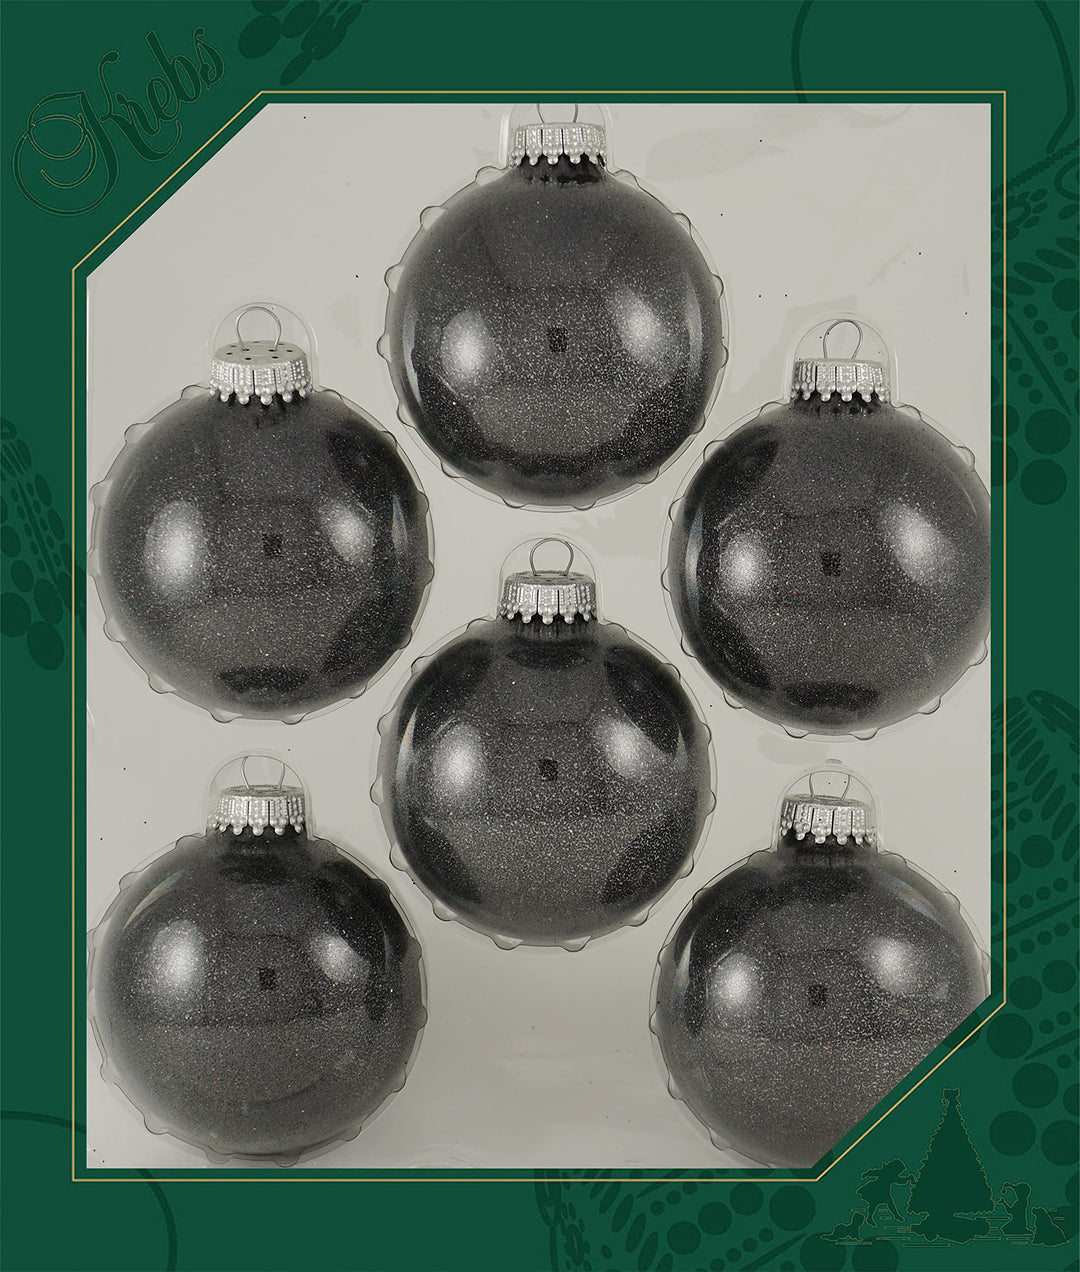 Christmas Tree Ornaments - 67mm / 2.625" [6 Pieces] Designer Glass Baubles from Christmas By Krebs - Handcrafted Seamless Hanging Holiday Decor for Trees (Black Sparkle)